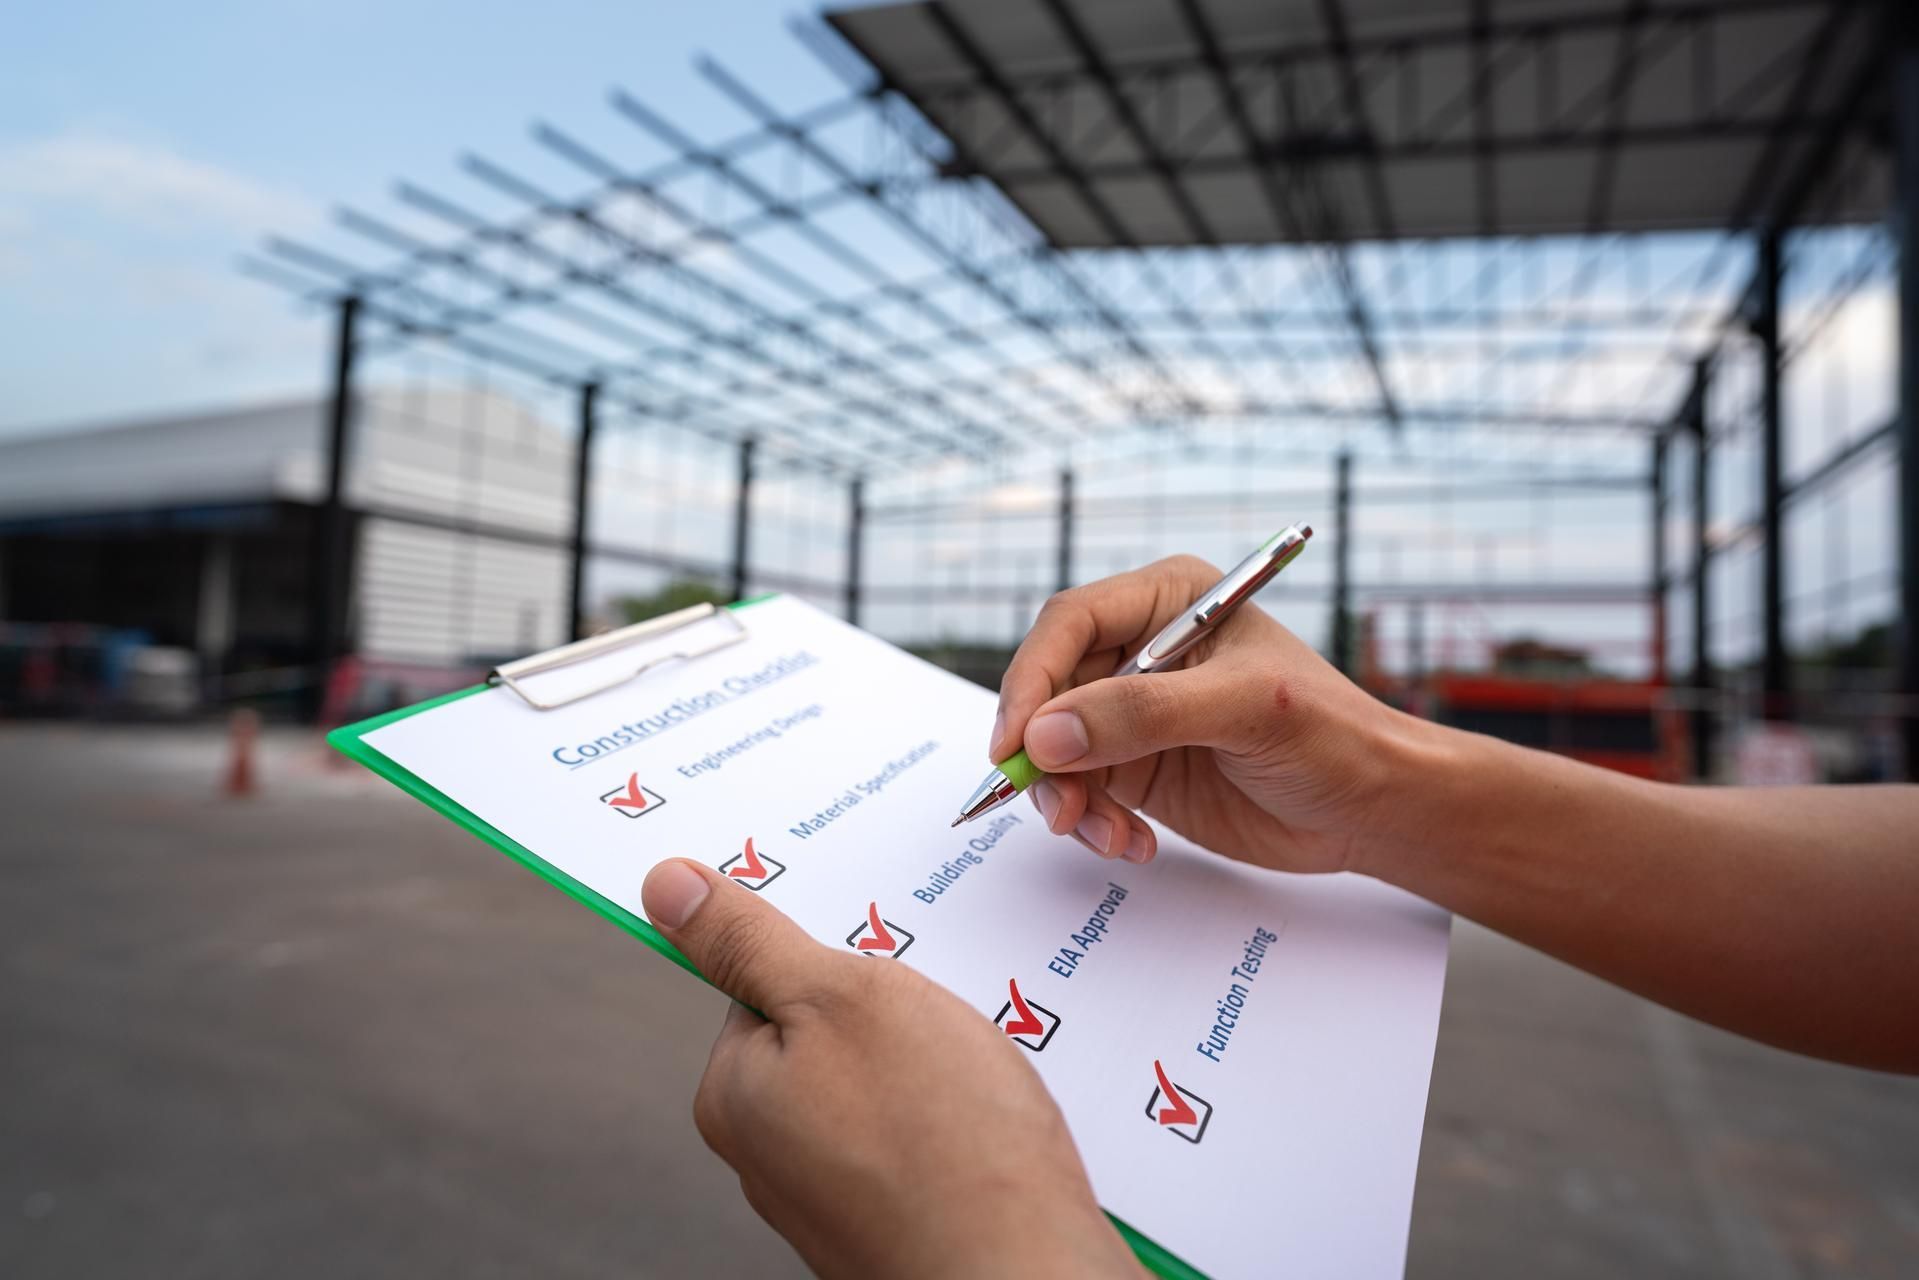  Building Inspections Checklist